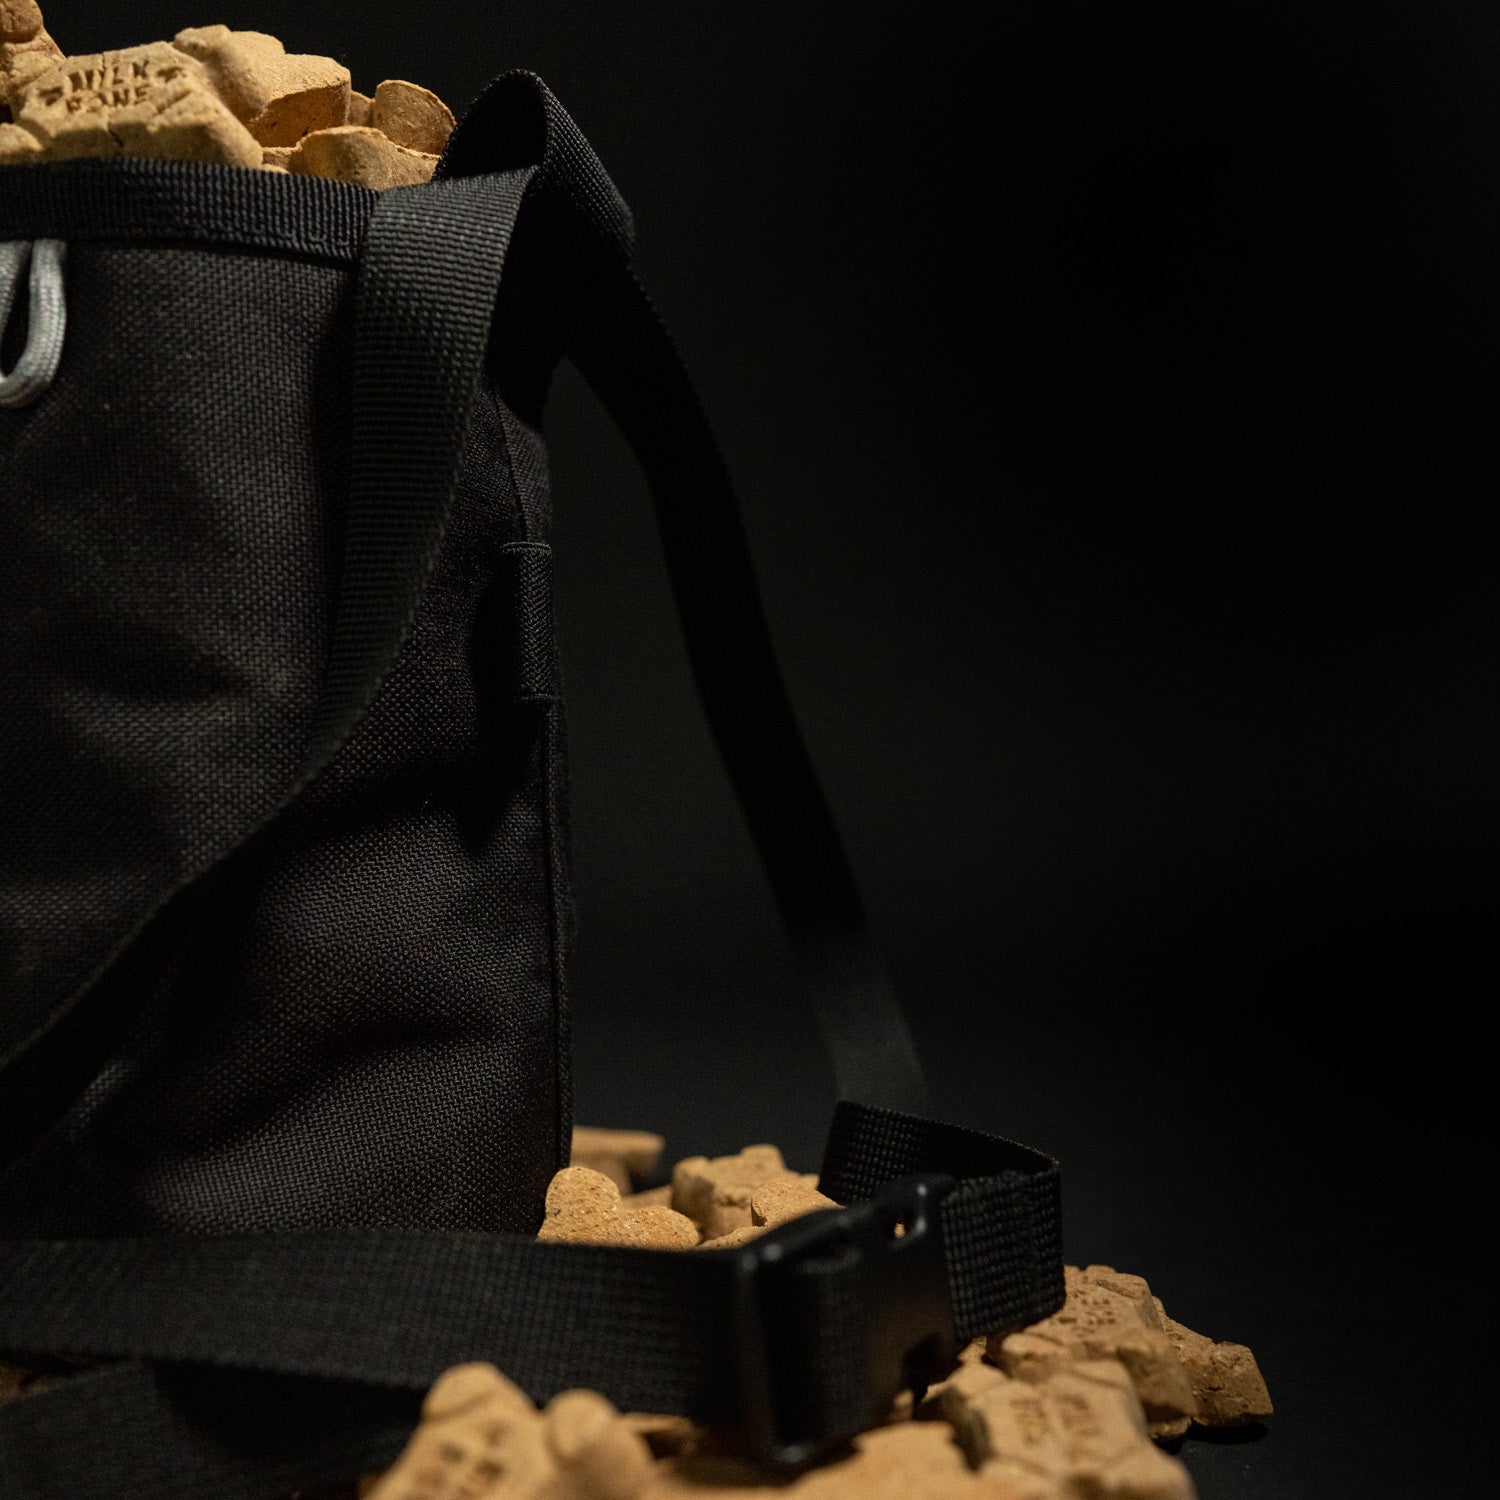 topo designs X atlas pet company collaboration treat bag for dog training and convenient treat storage on the trail